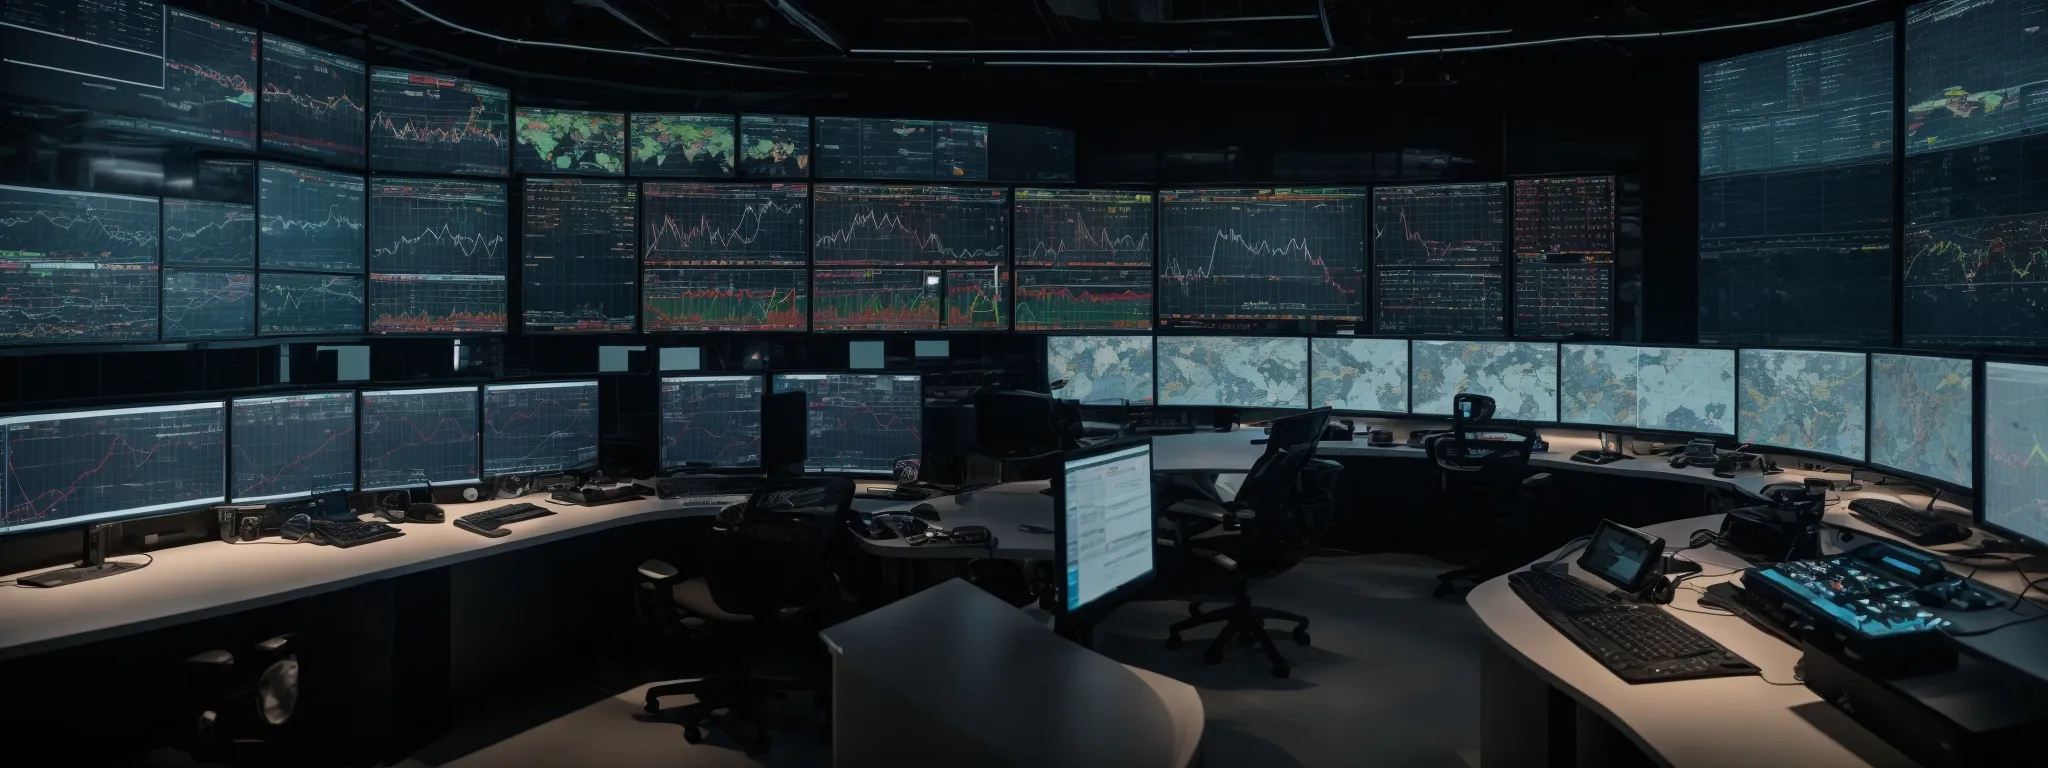 a high-tech control room with screens displaying data analysis graphs and interactive maps for real-time global seo monitoring.